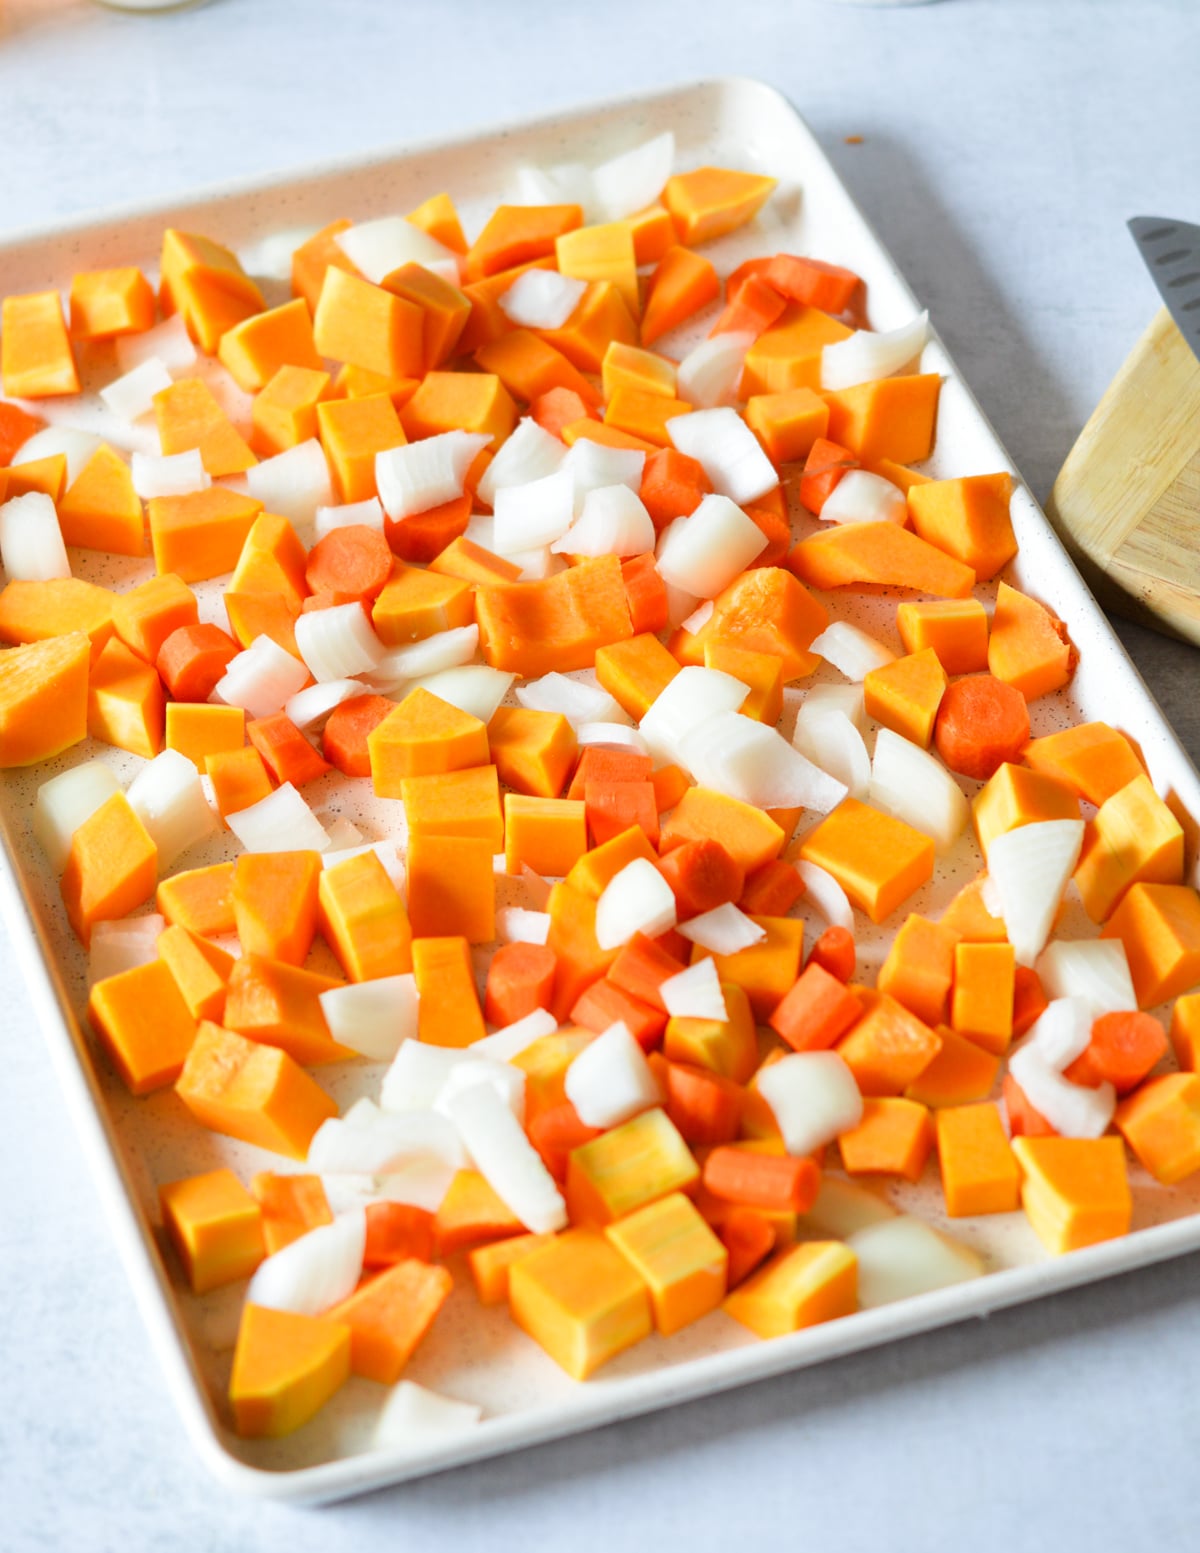 butternut squash, onion, and carrots on a sheet pan.